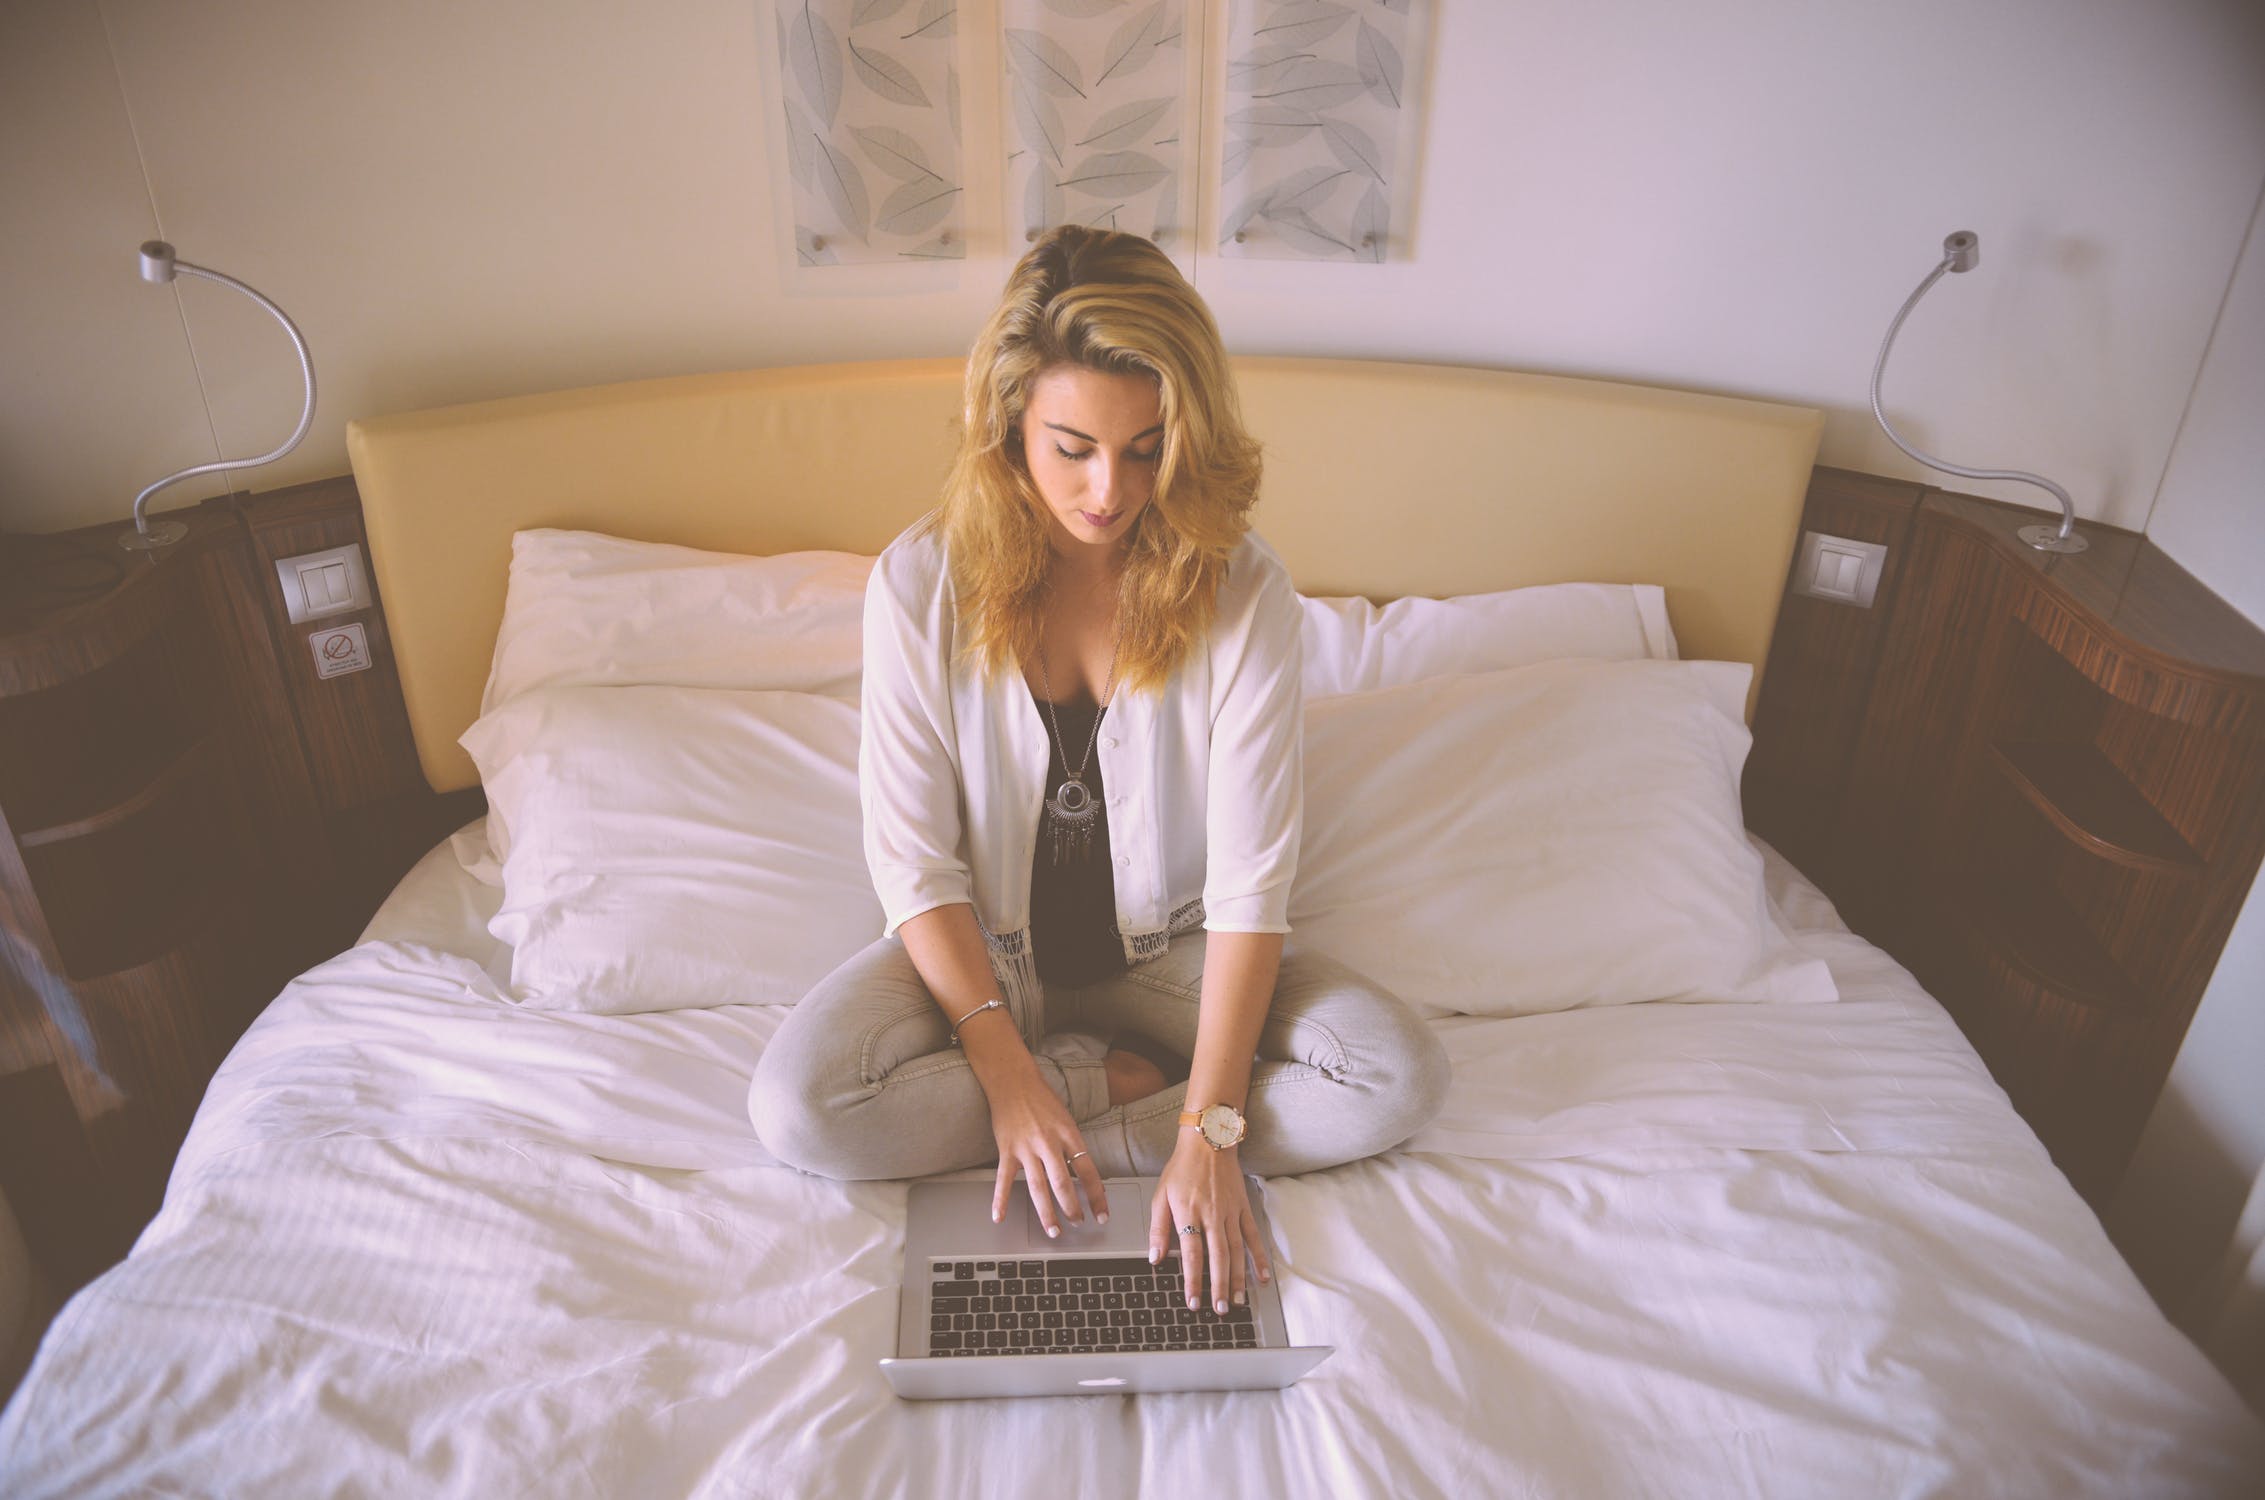 4 Reasons Why Working from Home is Awesome